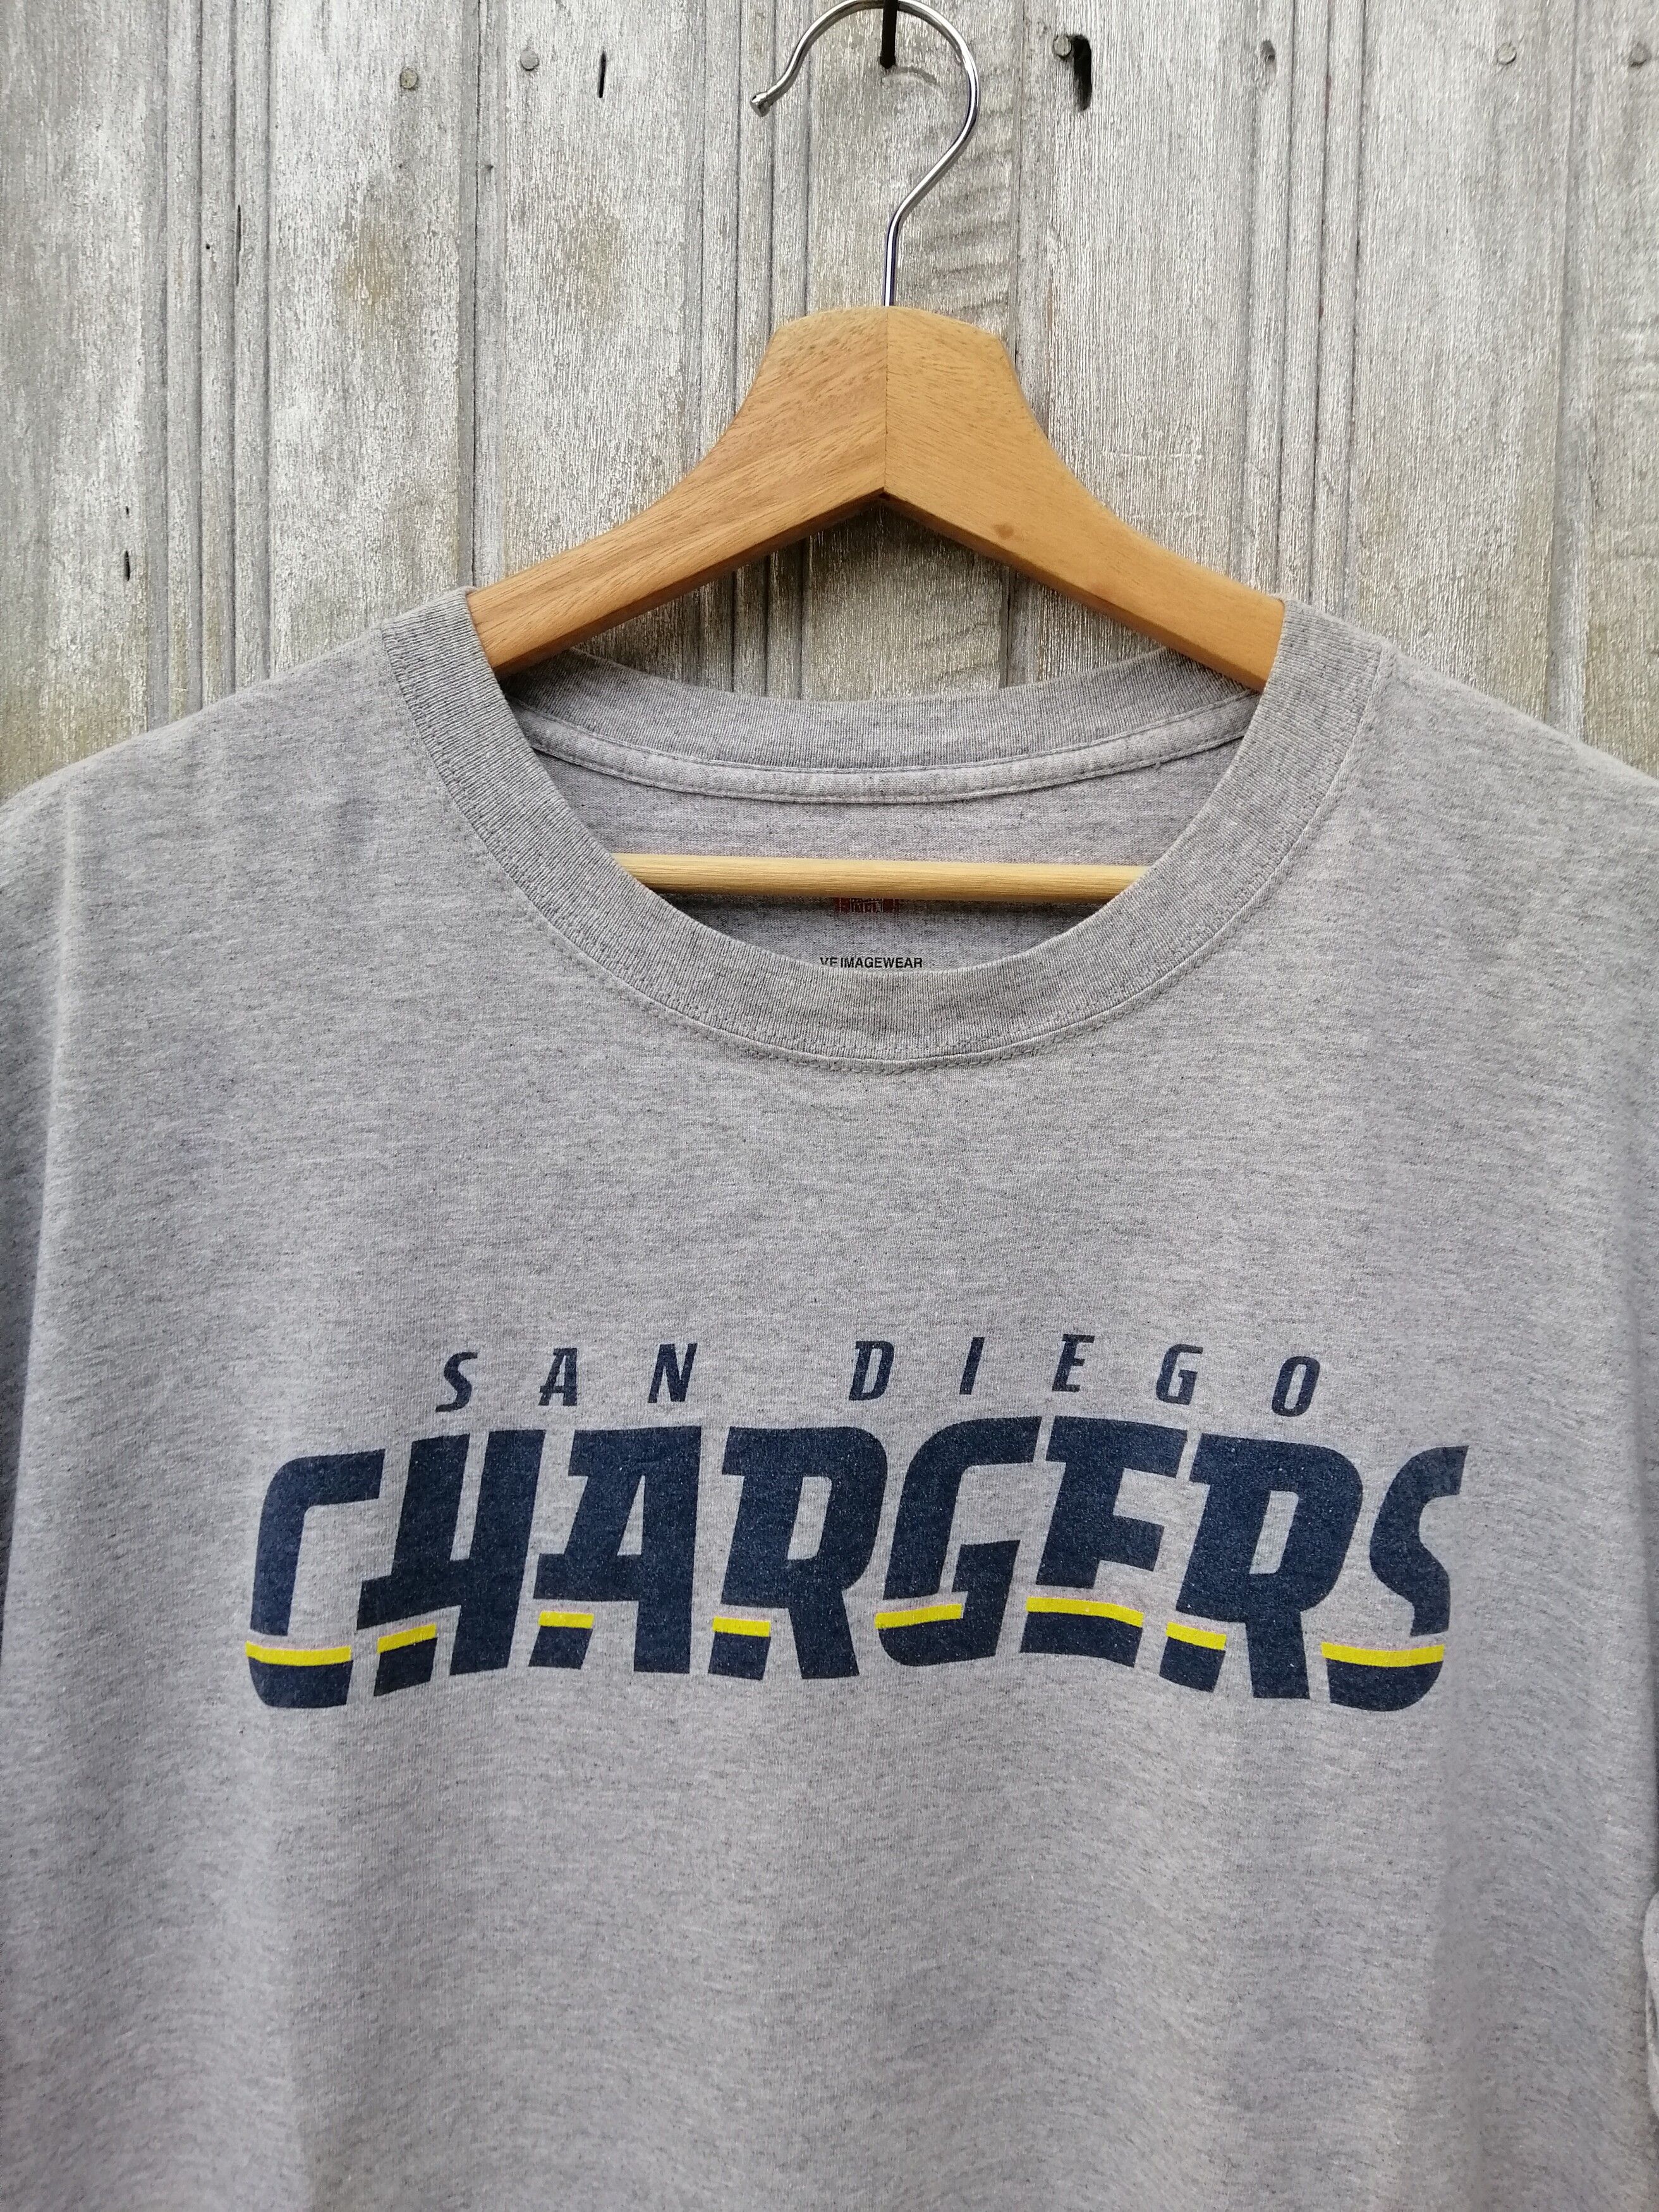 Vintage San Diego Chargers NFLP American Football Shirt Size L Size US L / EU 52-54 / 3 - 1 Preview